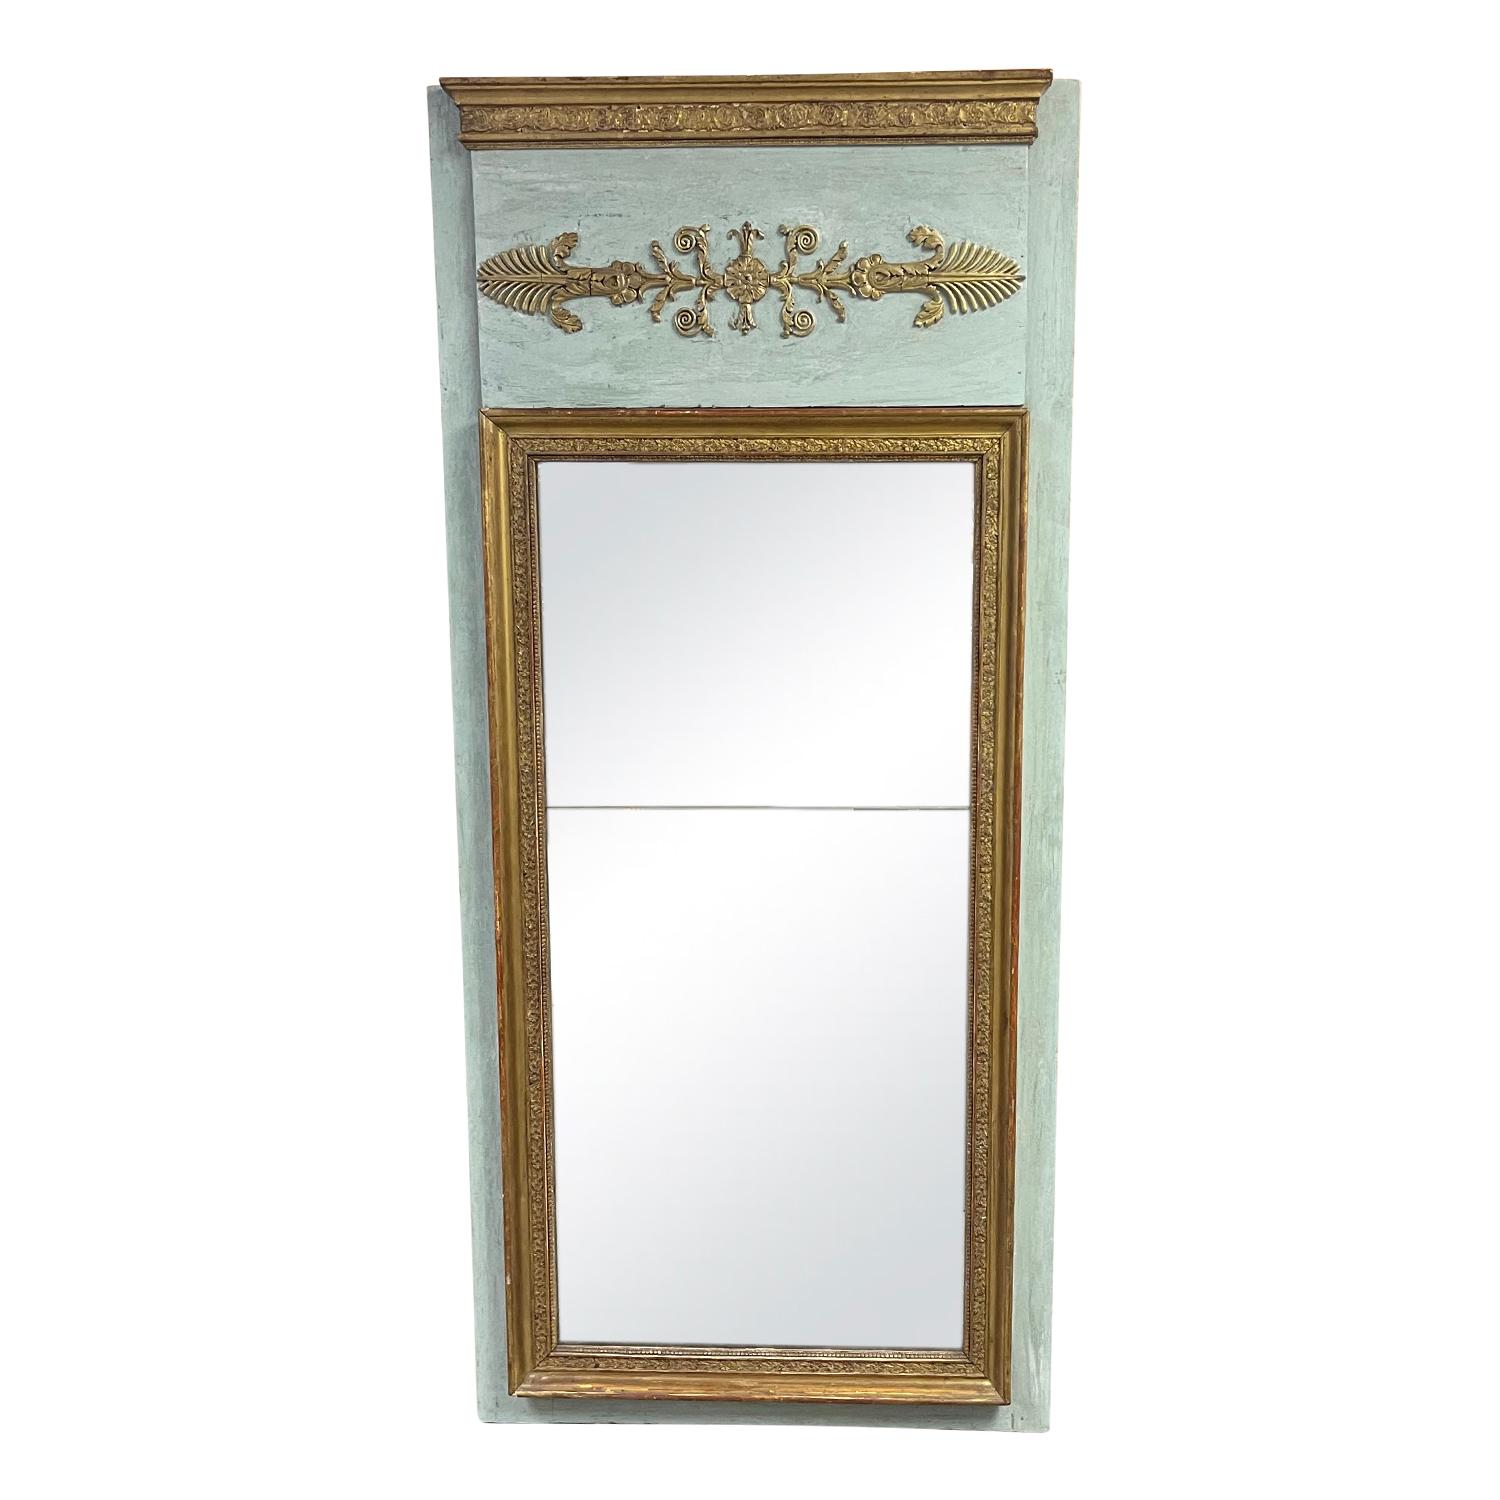 Hand-Carved 19th Century Grey-Green French Empire Antique Gilded Wood Trumeau Glass Mirror For Sale